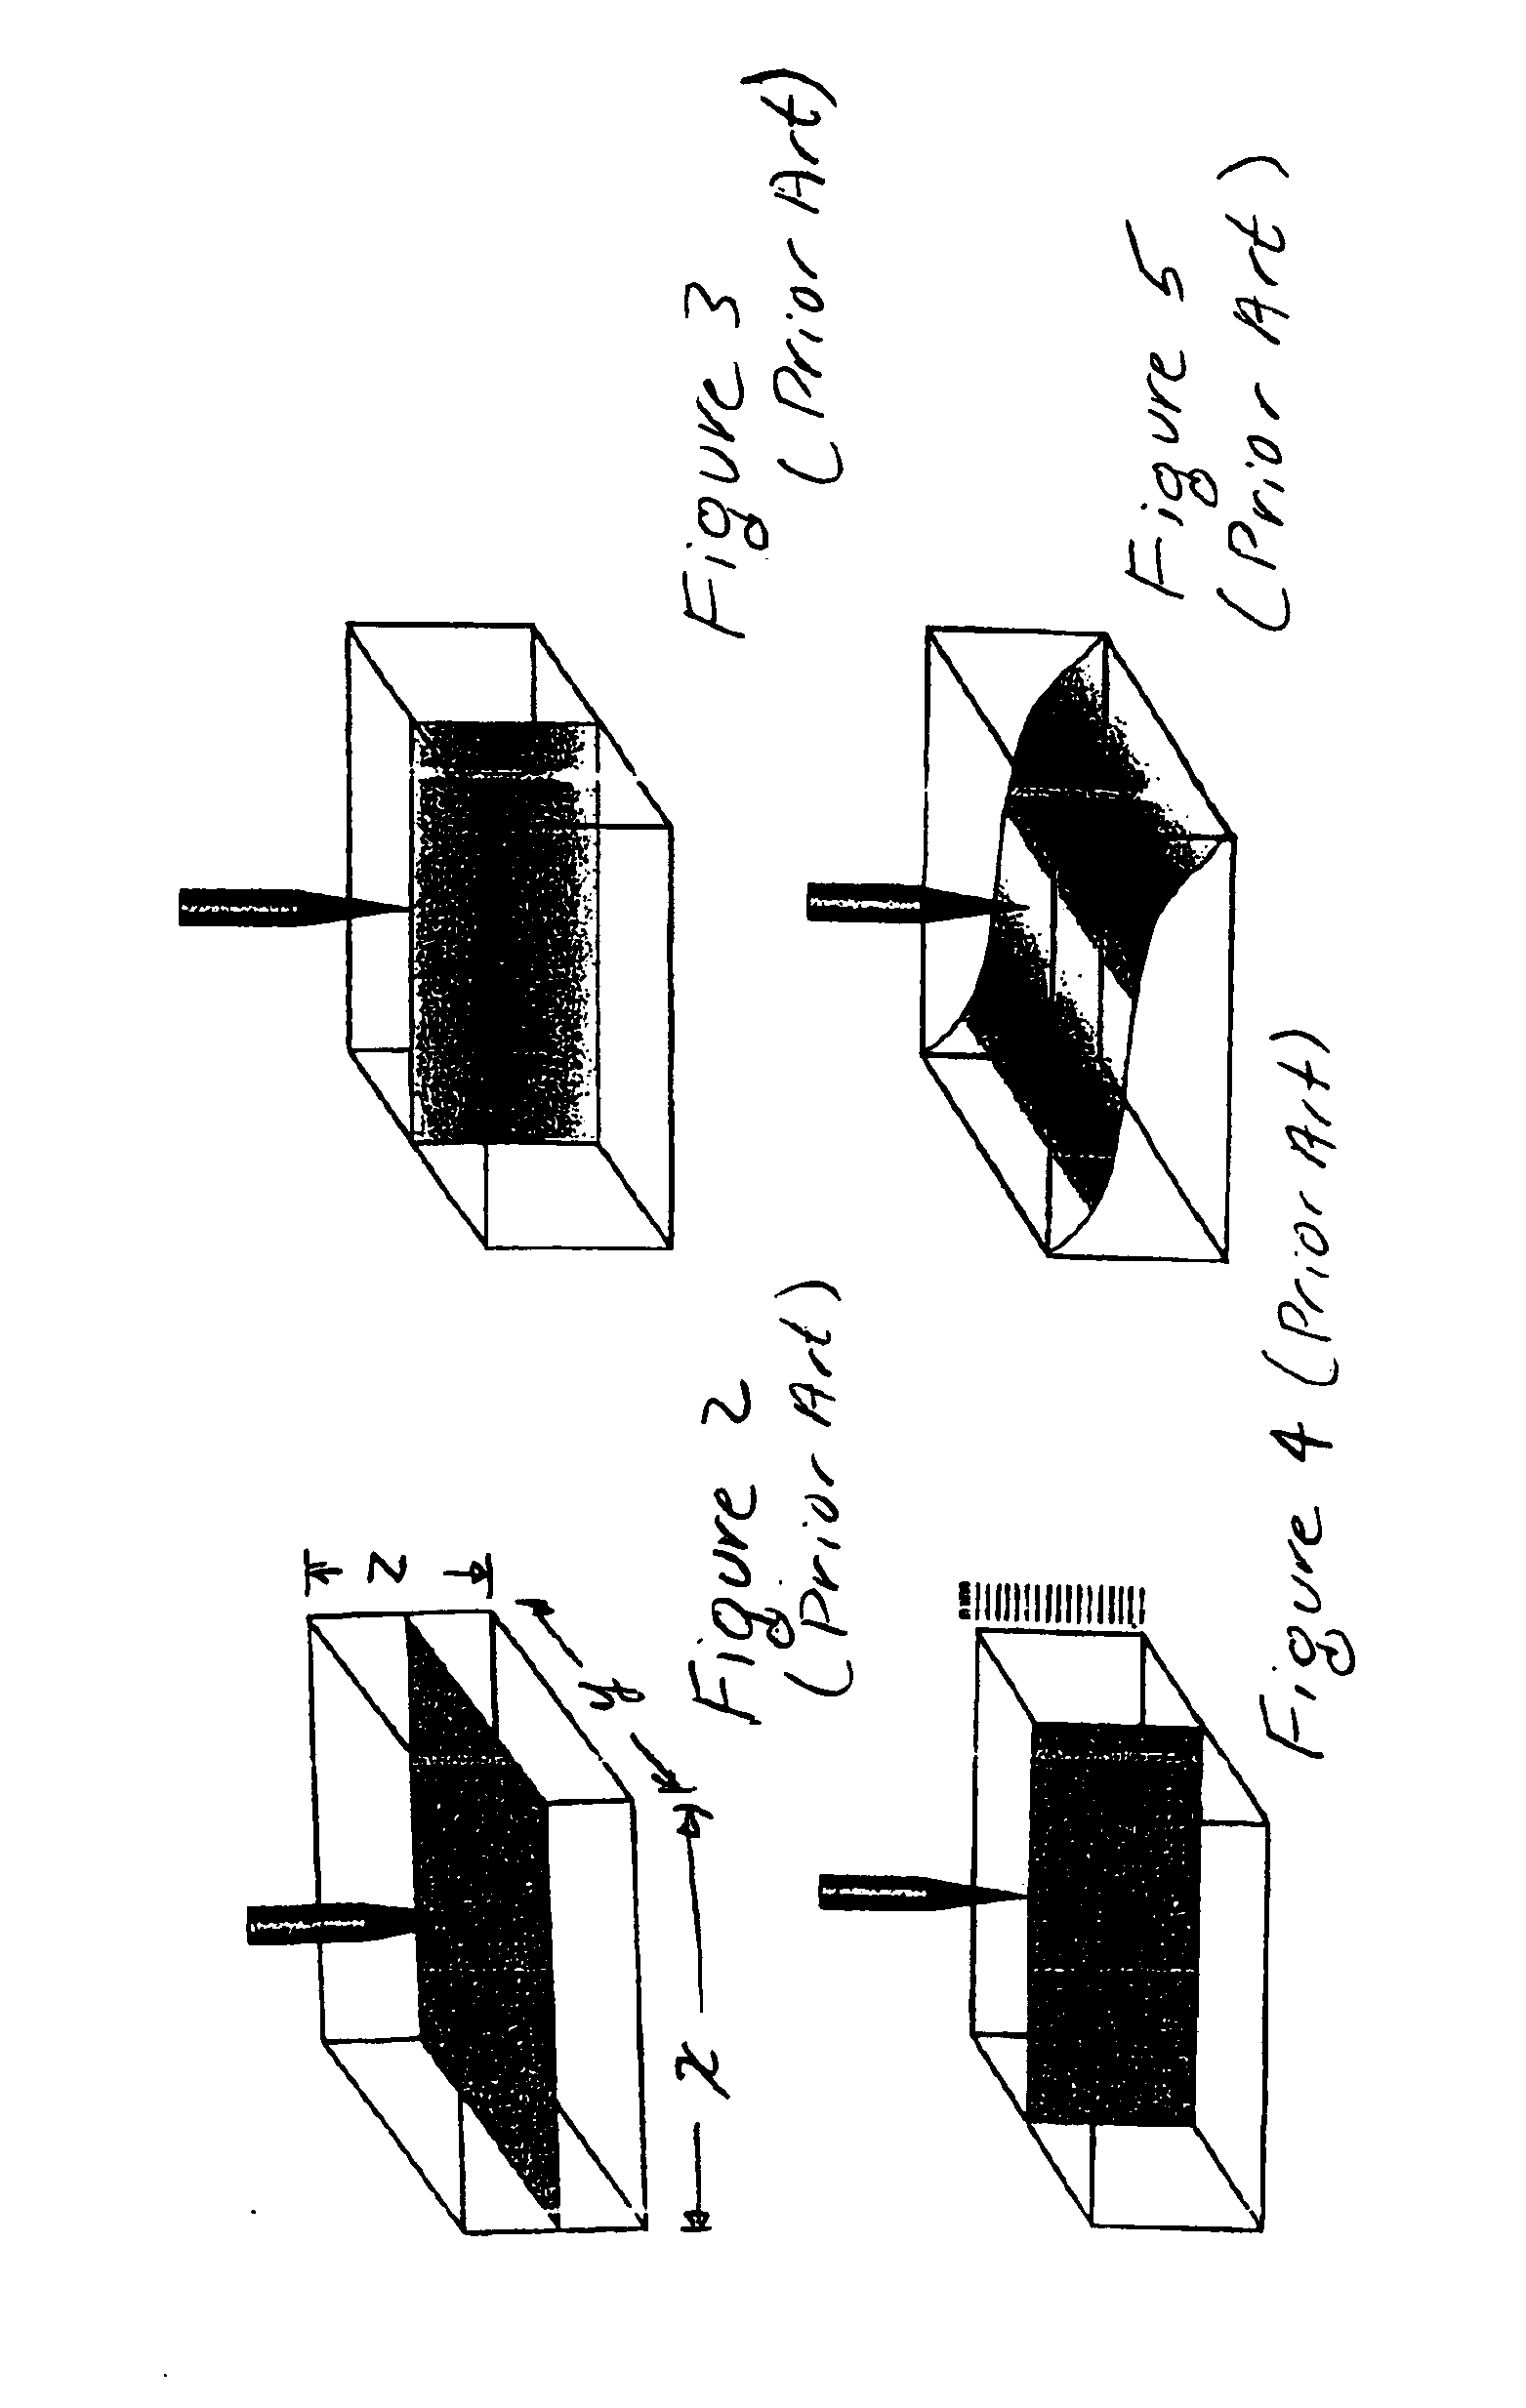 Acoustic micro imaging method and apparatus for capturing 4D acoustic reflection virtual samples